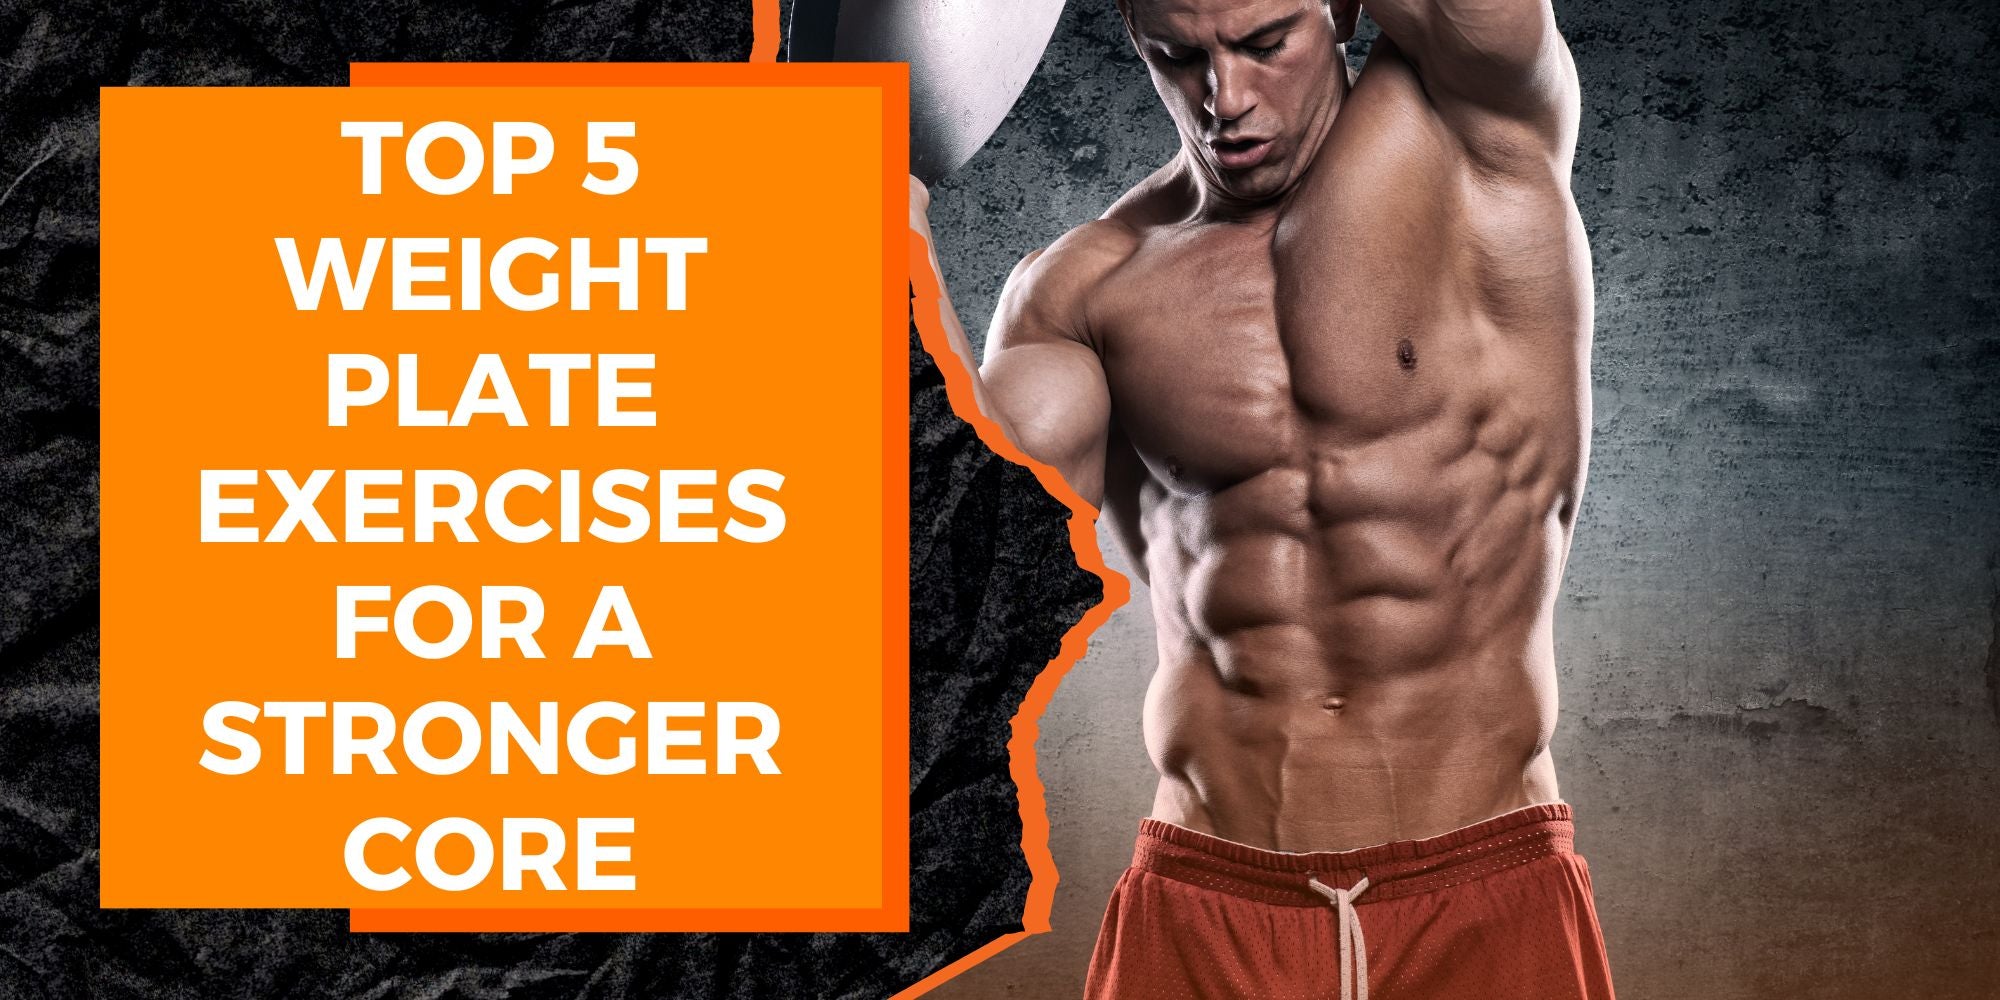 Top 5 Weight Plate Exercises for a Stronger Core